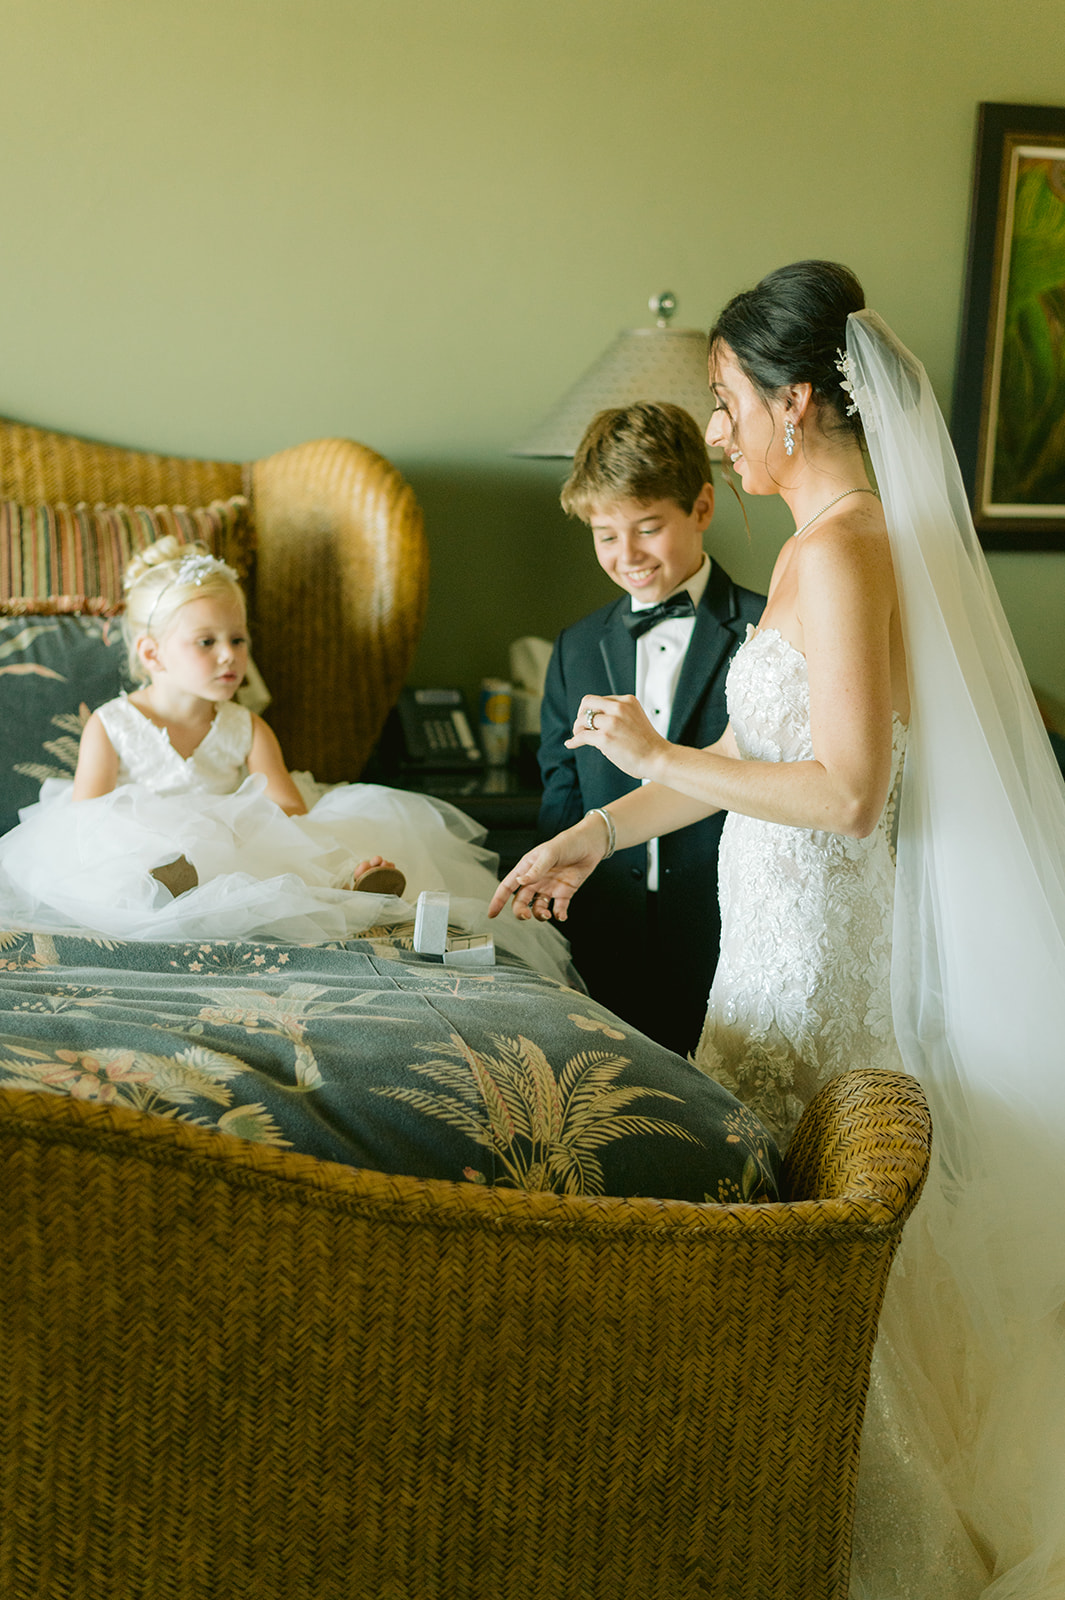 Naples Florida Wedding Photographer for Your Beautiful Day
